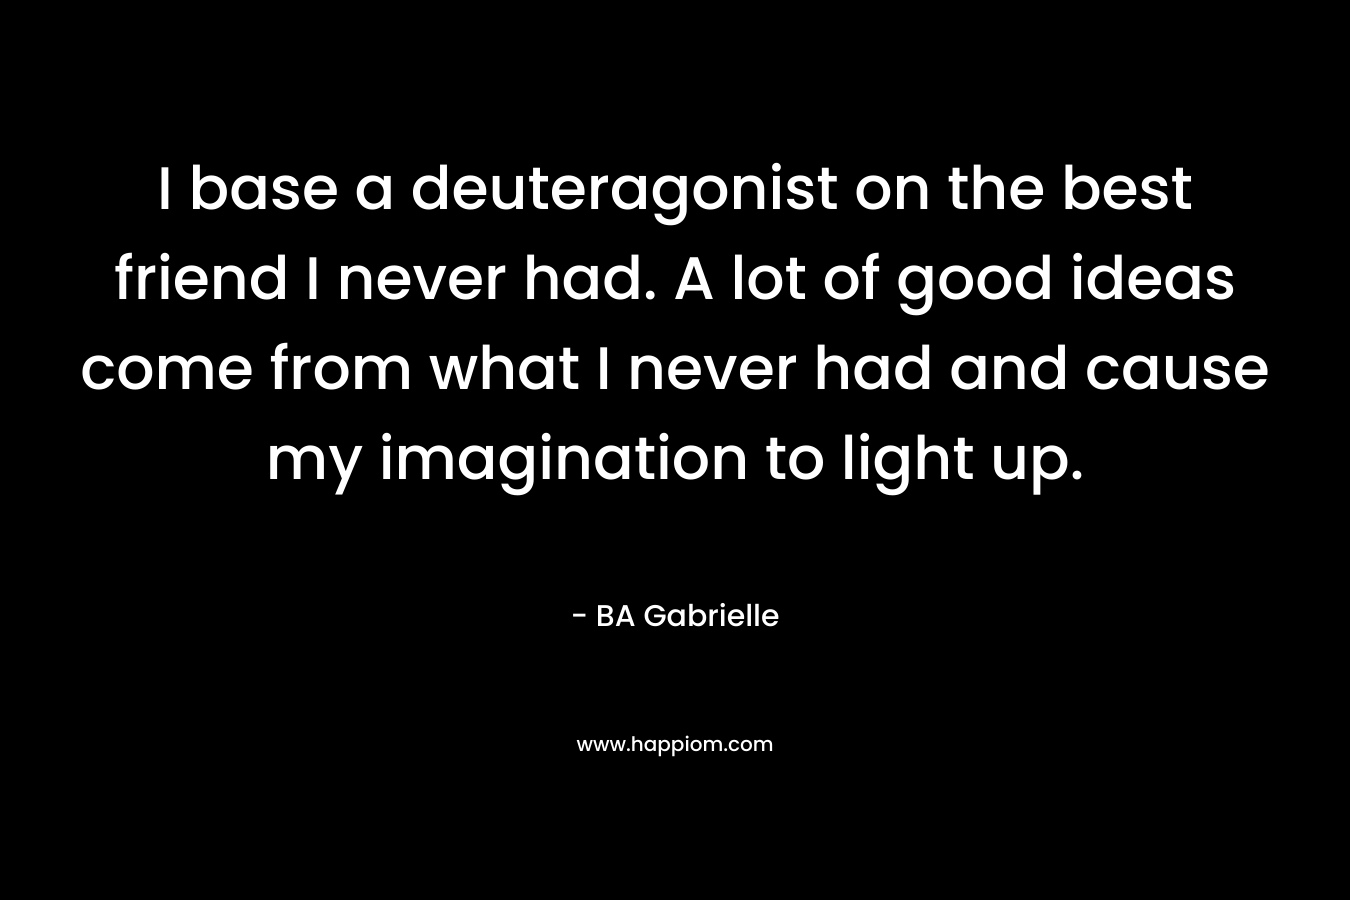 I base a deuteragonist on the best friend I never had. A lot of good ideas come from what I never had and cause my imagination to light up. – BA Gabrielle